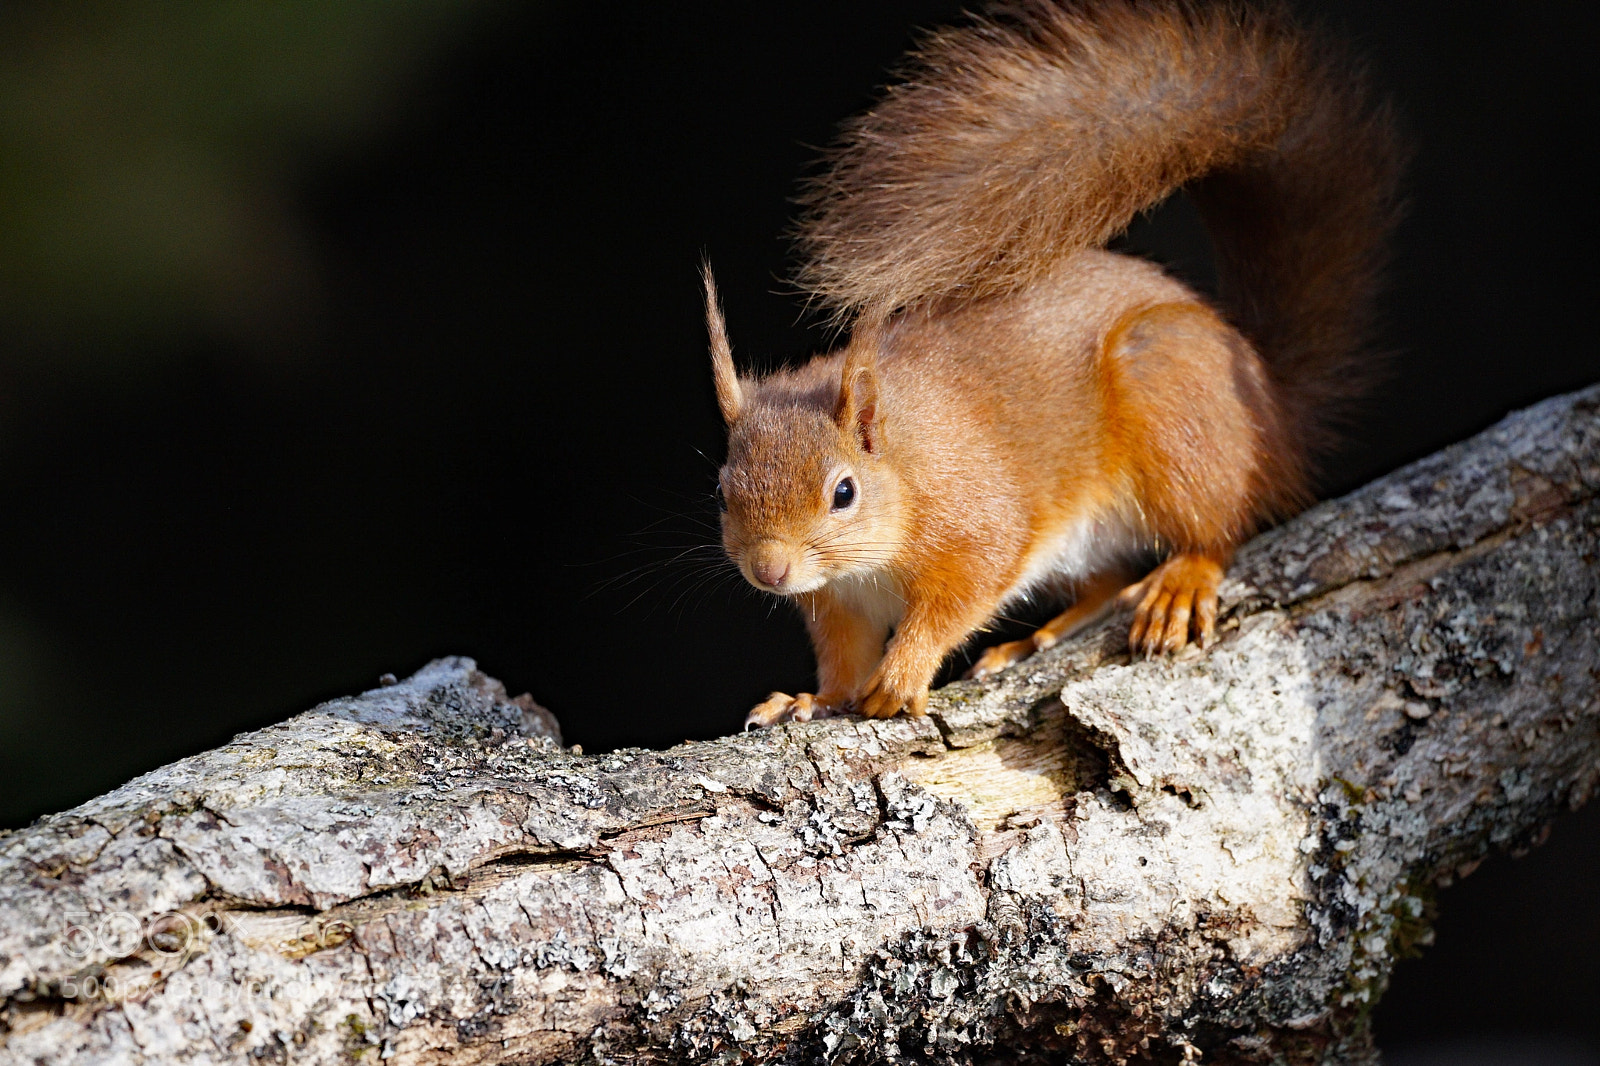 Sony a7 sample photo. Red squirrel, scottish highlands photography